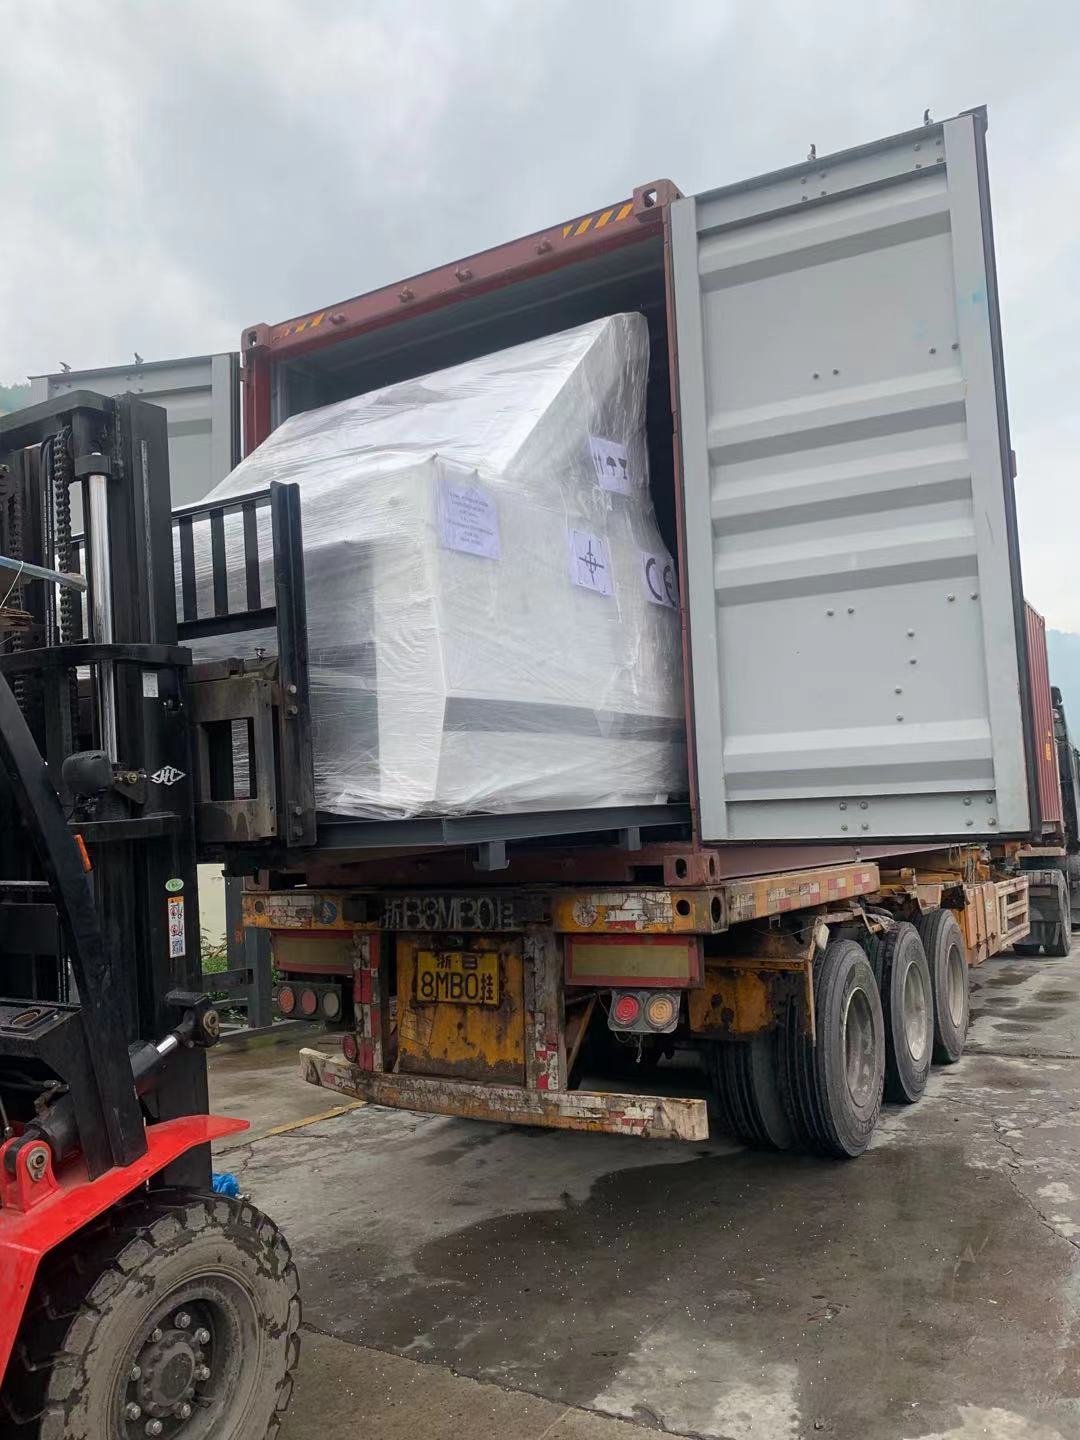 YOUBOND MACHINE Deliver to Greece